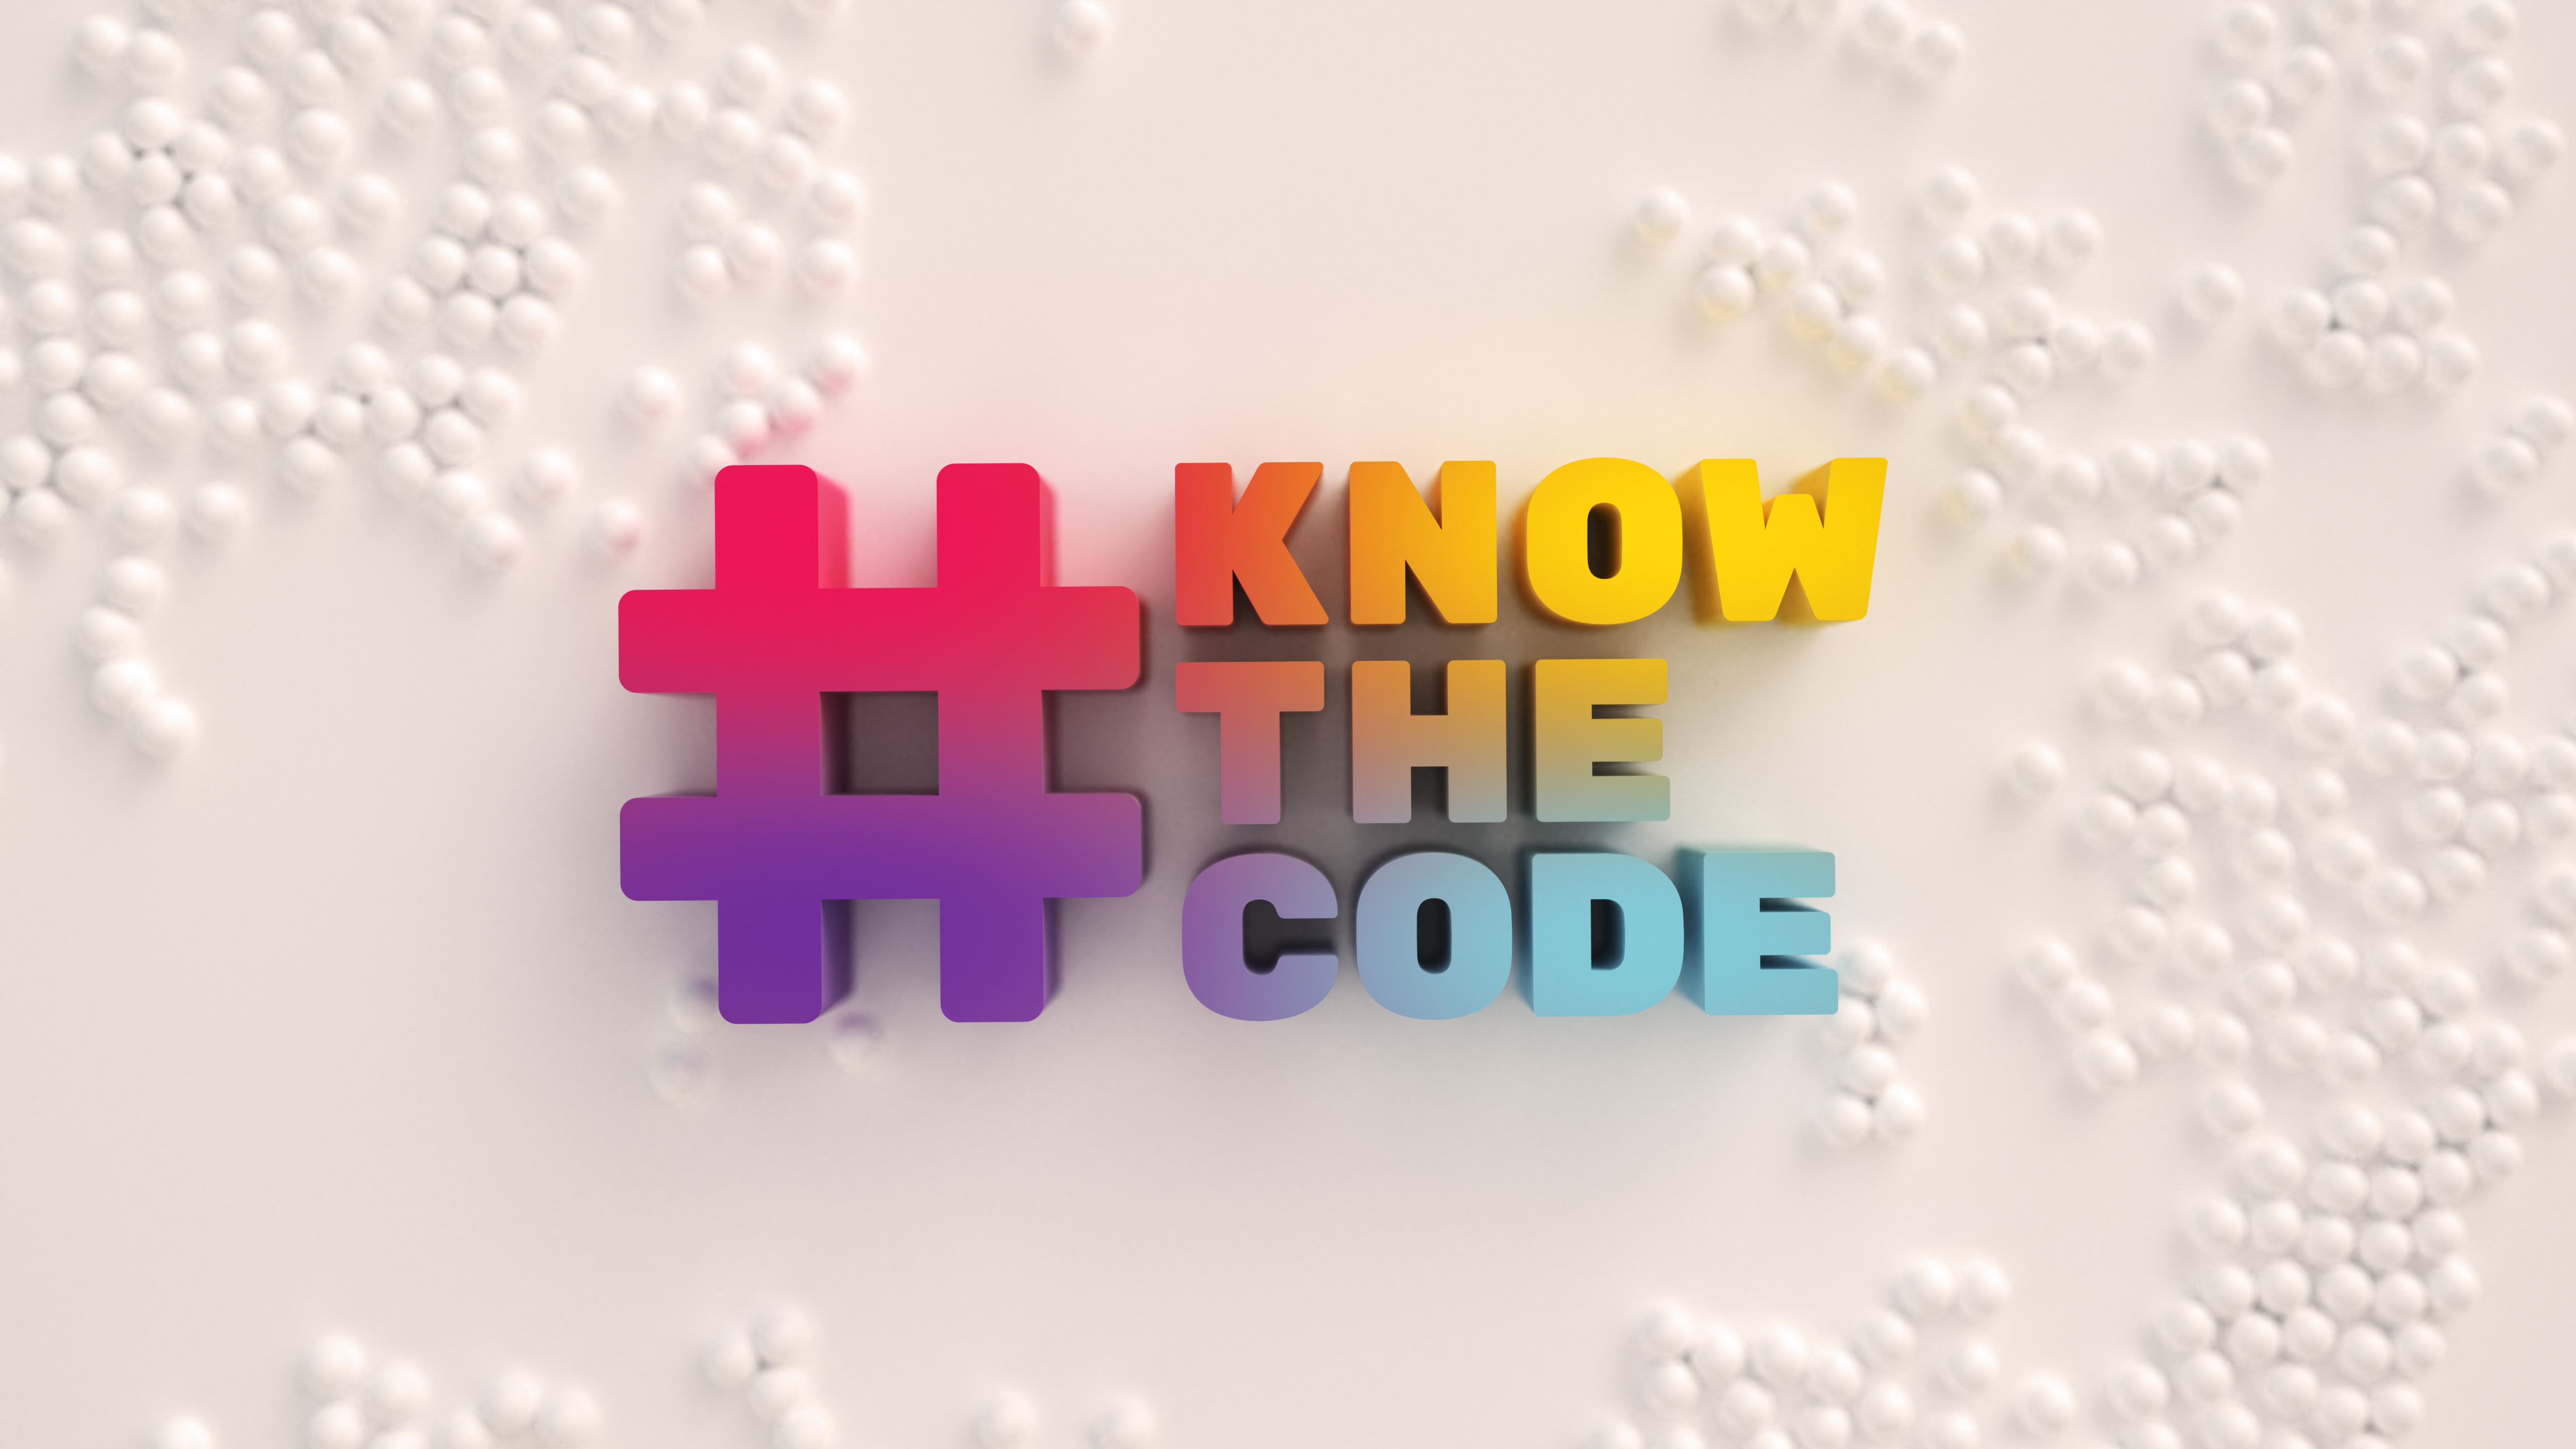 Know the code in rainbow text on a white background